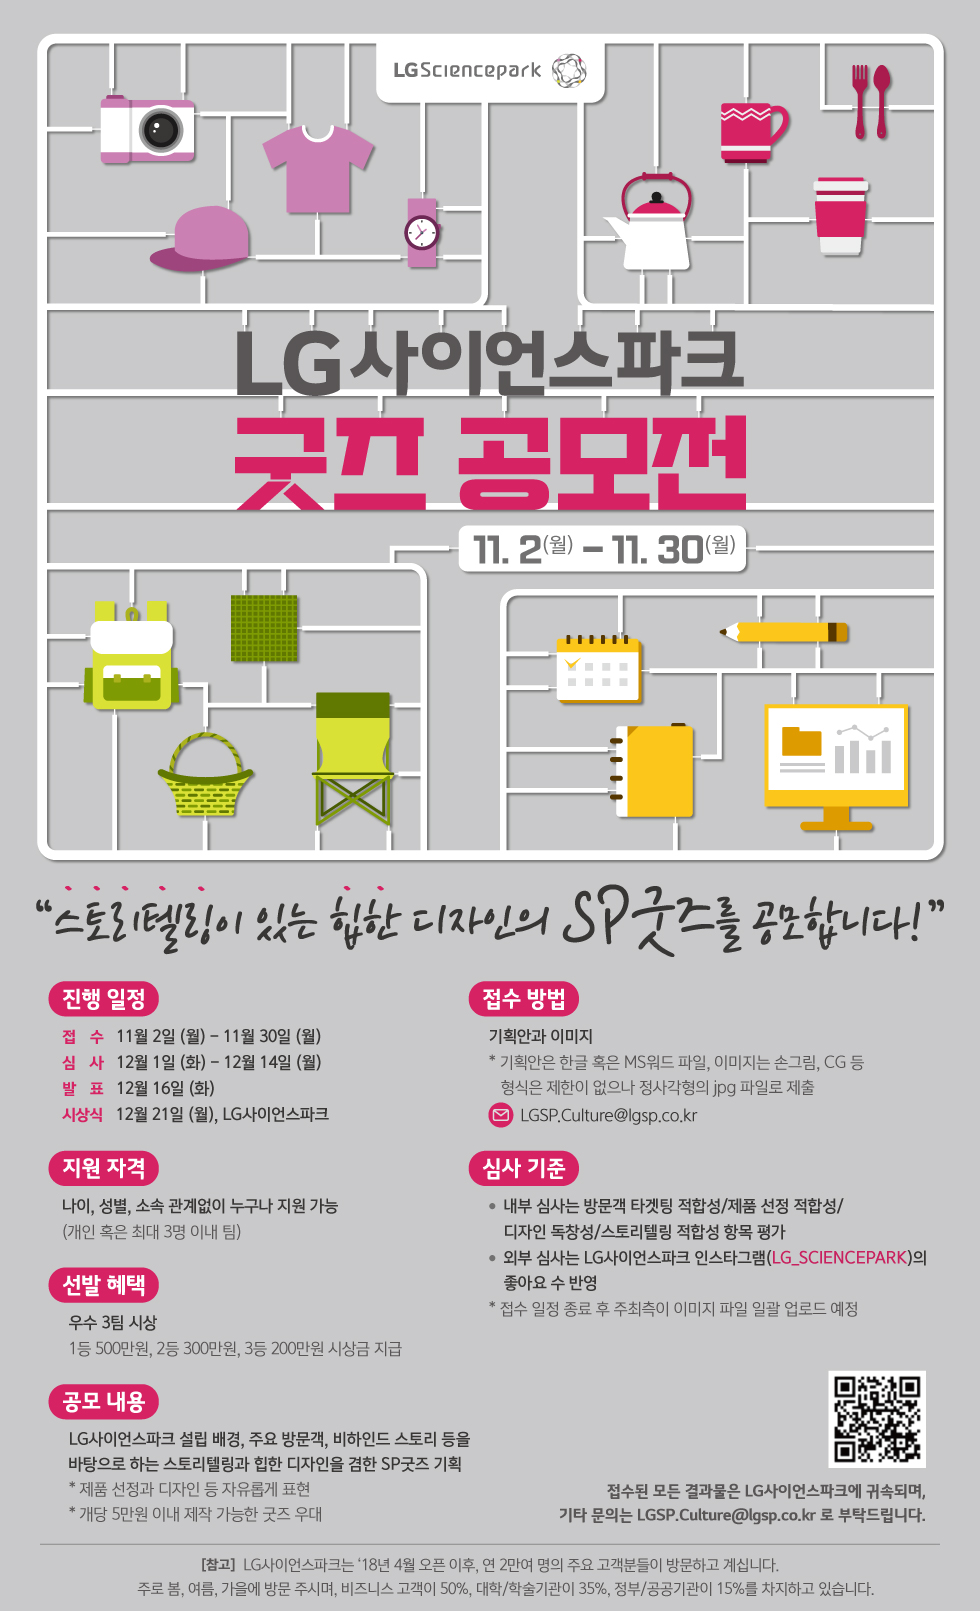 LG SCIENCE PARK COMPETITIONS